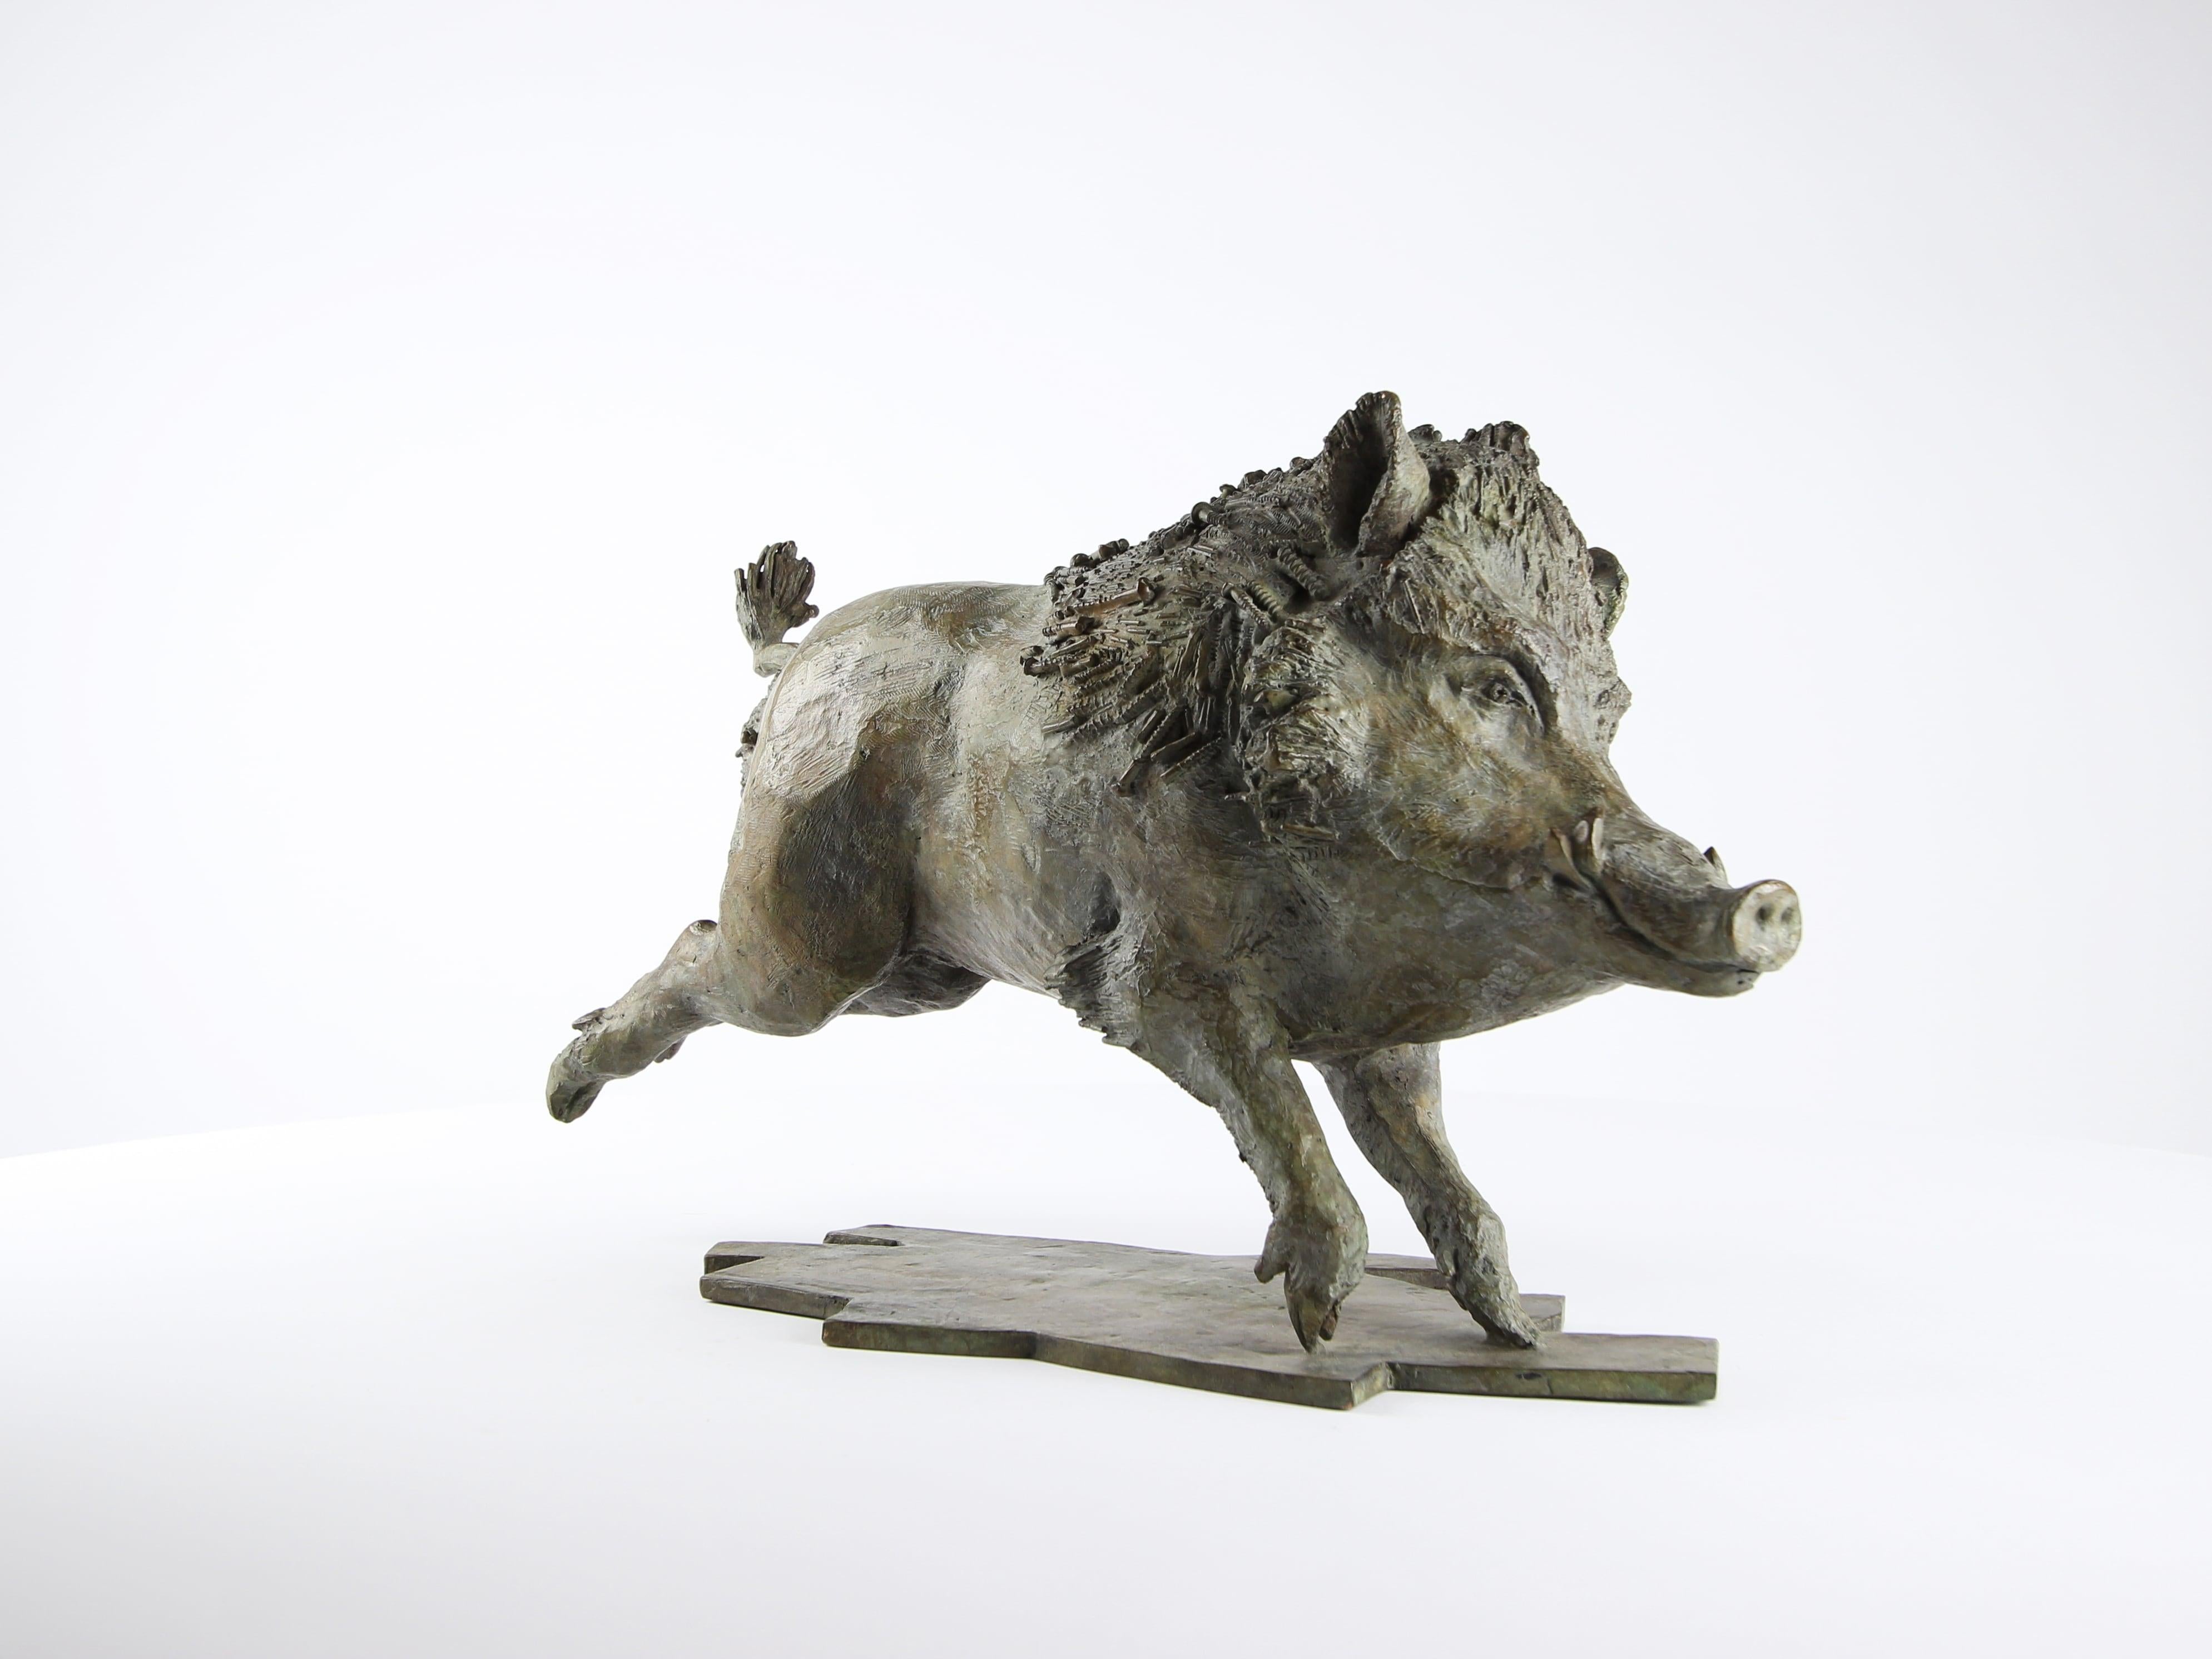 Wild Boar is a unique bronze sculpture by contemporary artist Chésade, dimensions are 24 × 44 × 17 cm (9.4 × 17.3 × 6.7 in). 
The sculpture is signed and comes with a certificate of authenticity.

The sculpture by Chésade is a component of the